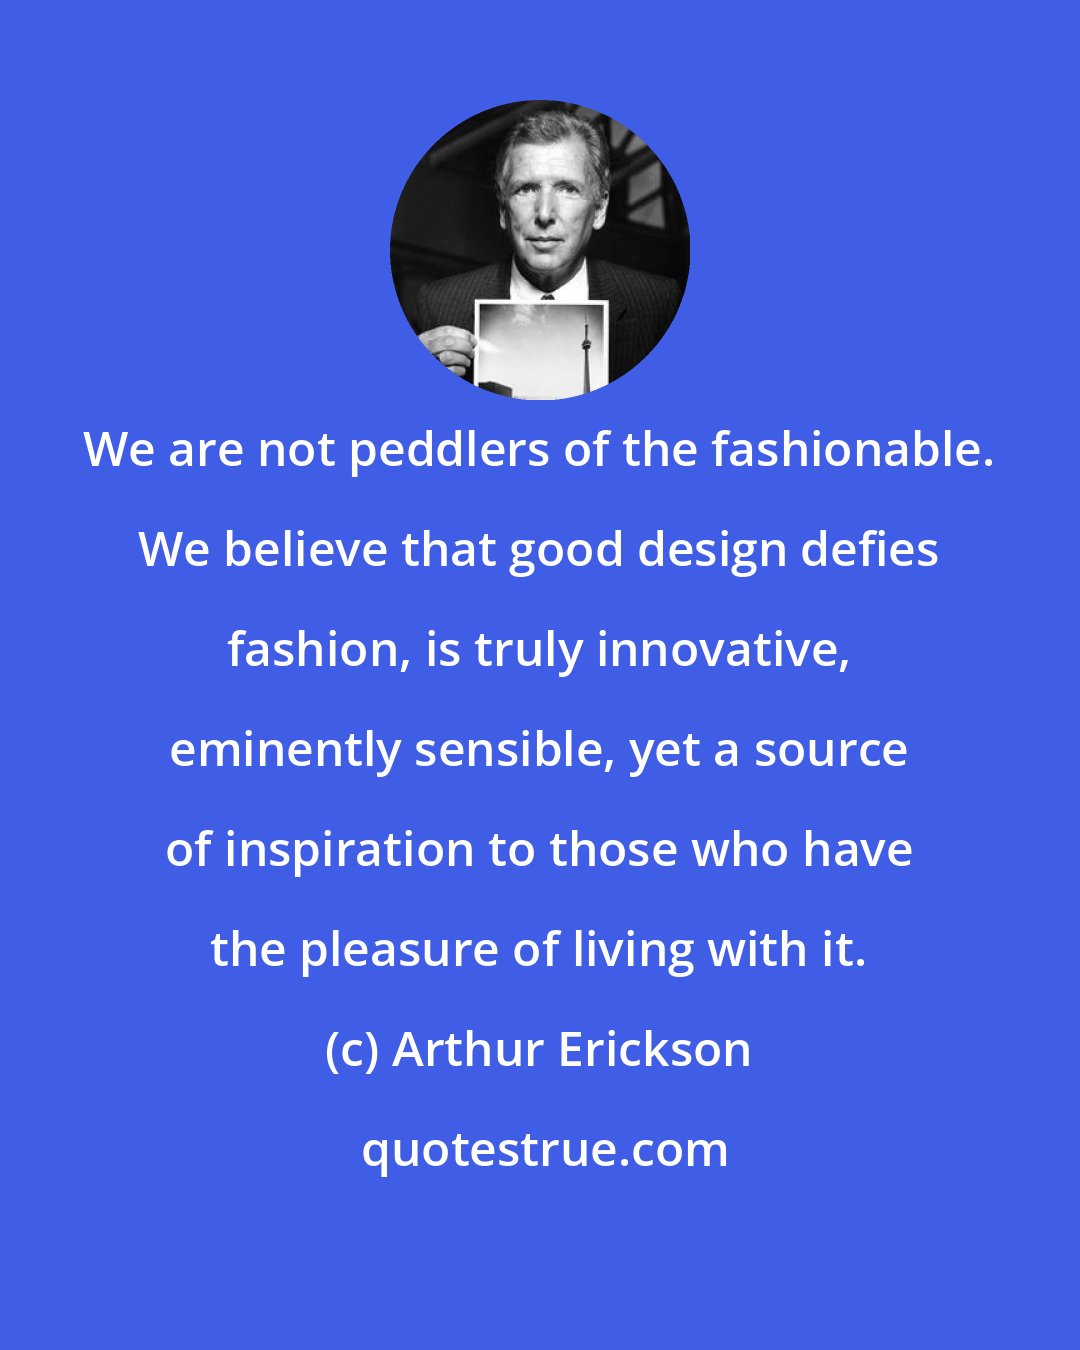 Arthur Erickson: We are not peddlers of the fashionable. We believe that good design defies fashion, is truly innovative, eminently sensible, yet a source of inspiration to those who have the pleasure of living with it.